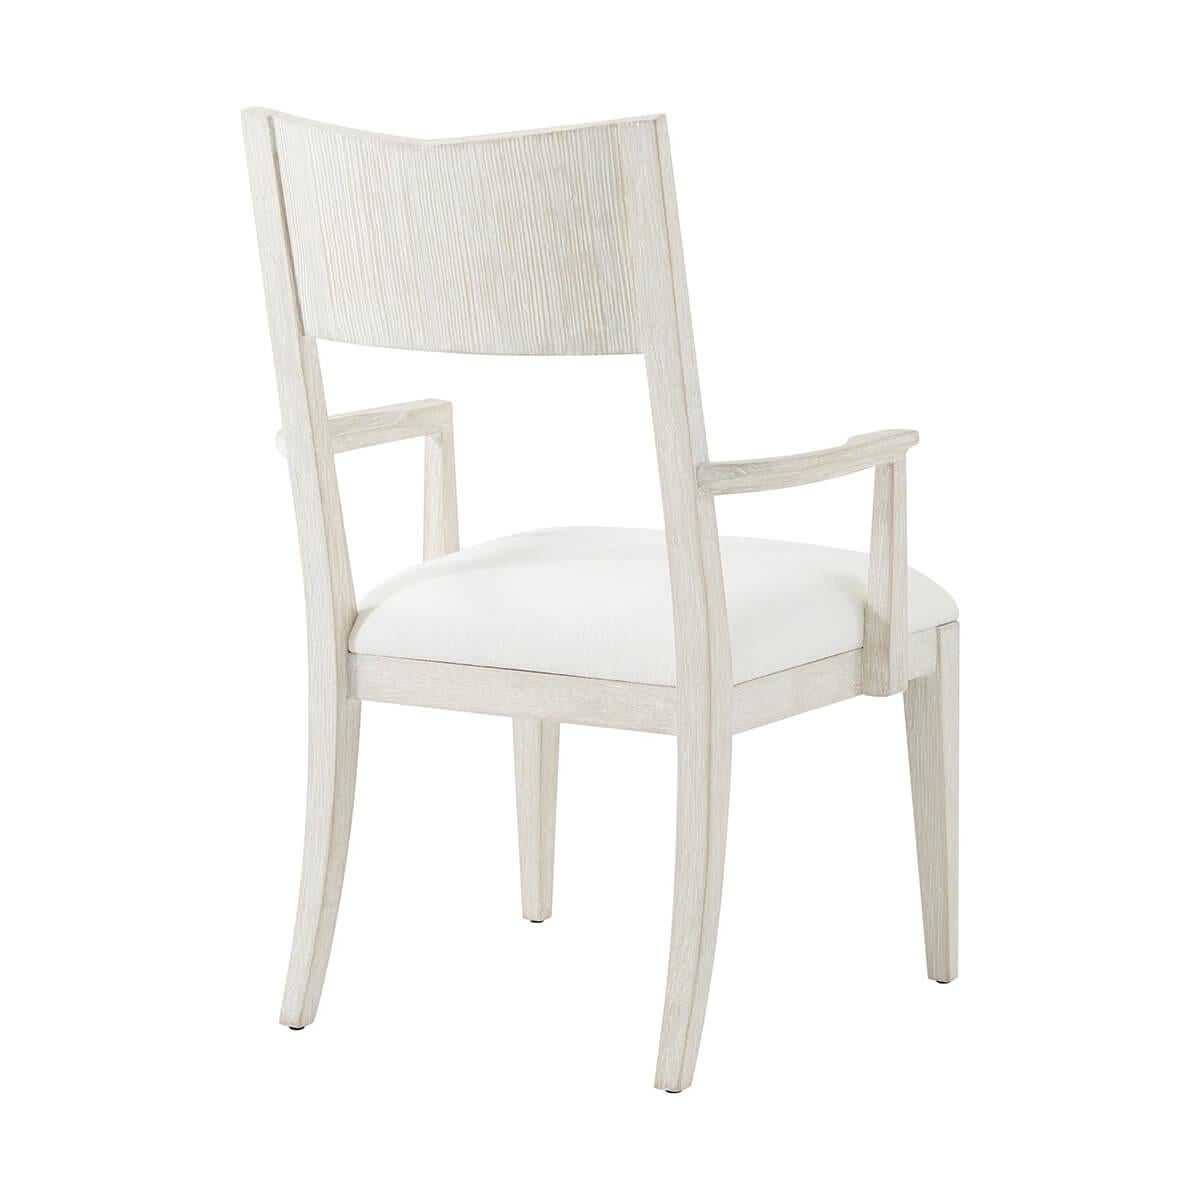 Designed with a beveled back, incredibly comfortable seat crafted from wire-brushed cerused pine in our Sea Salt finish.

Dimensions: 24.75